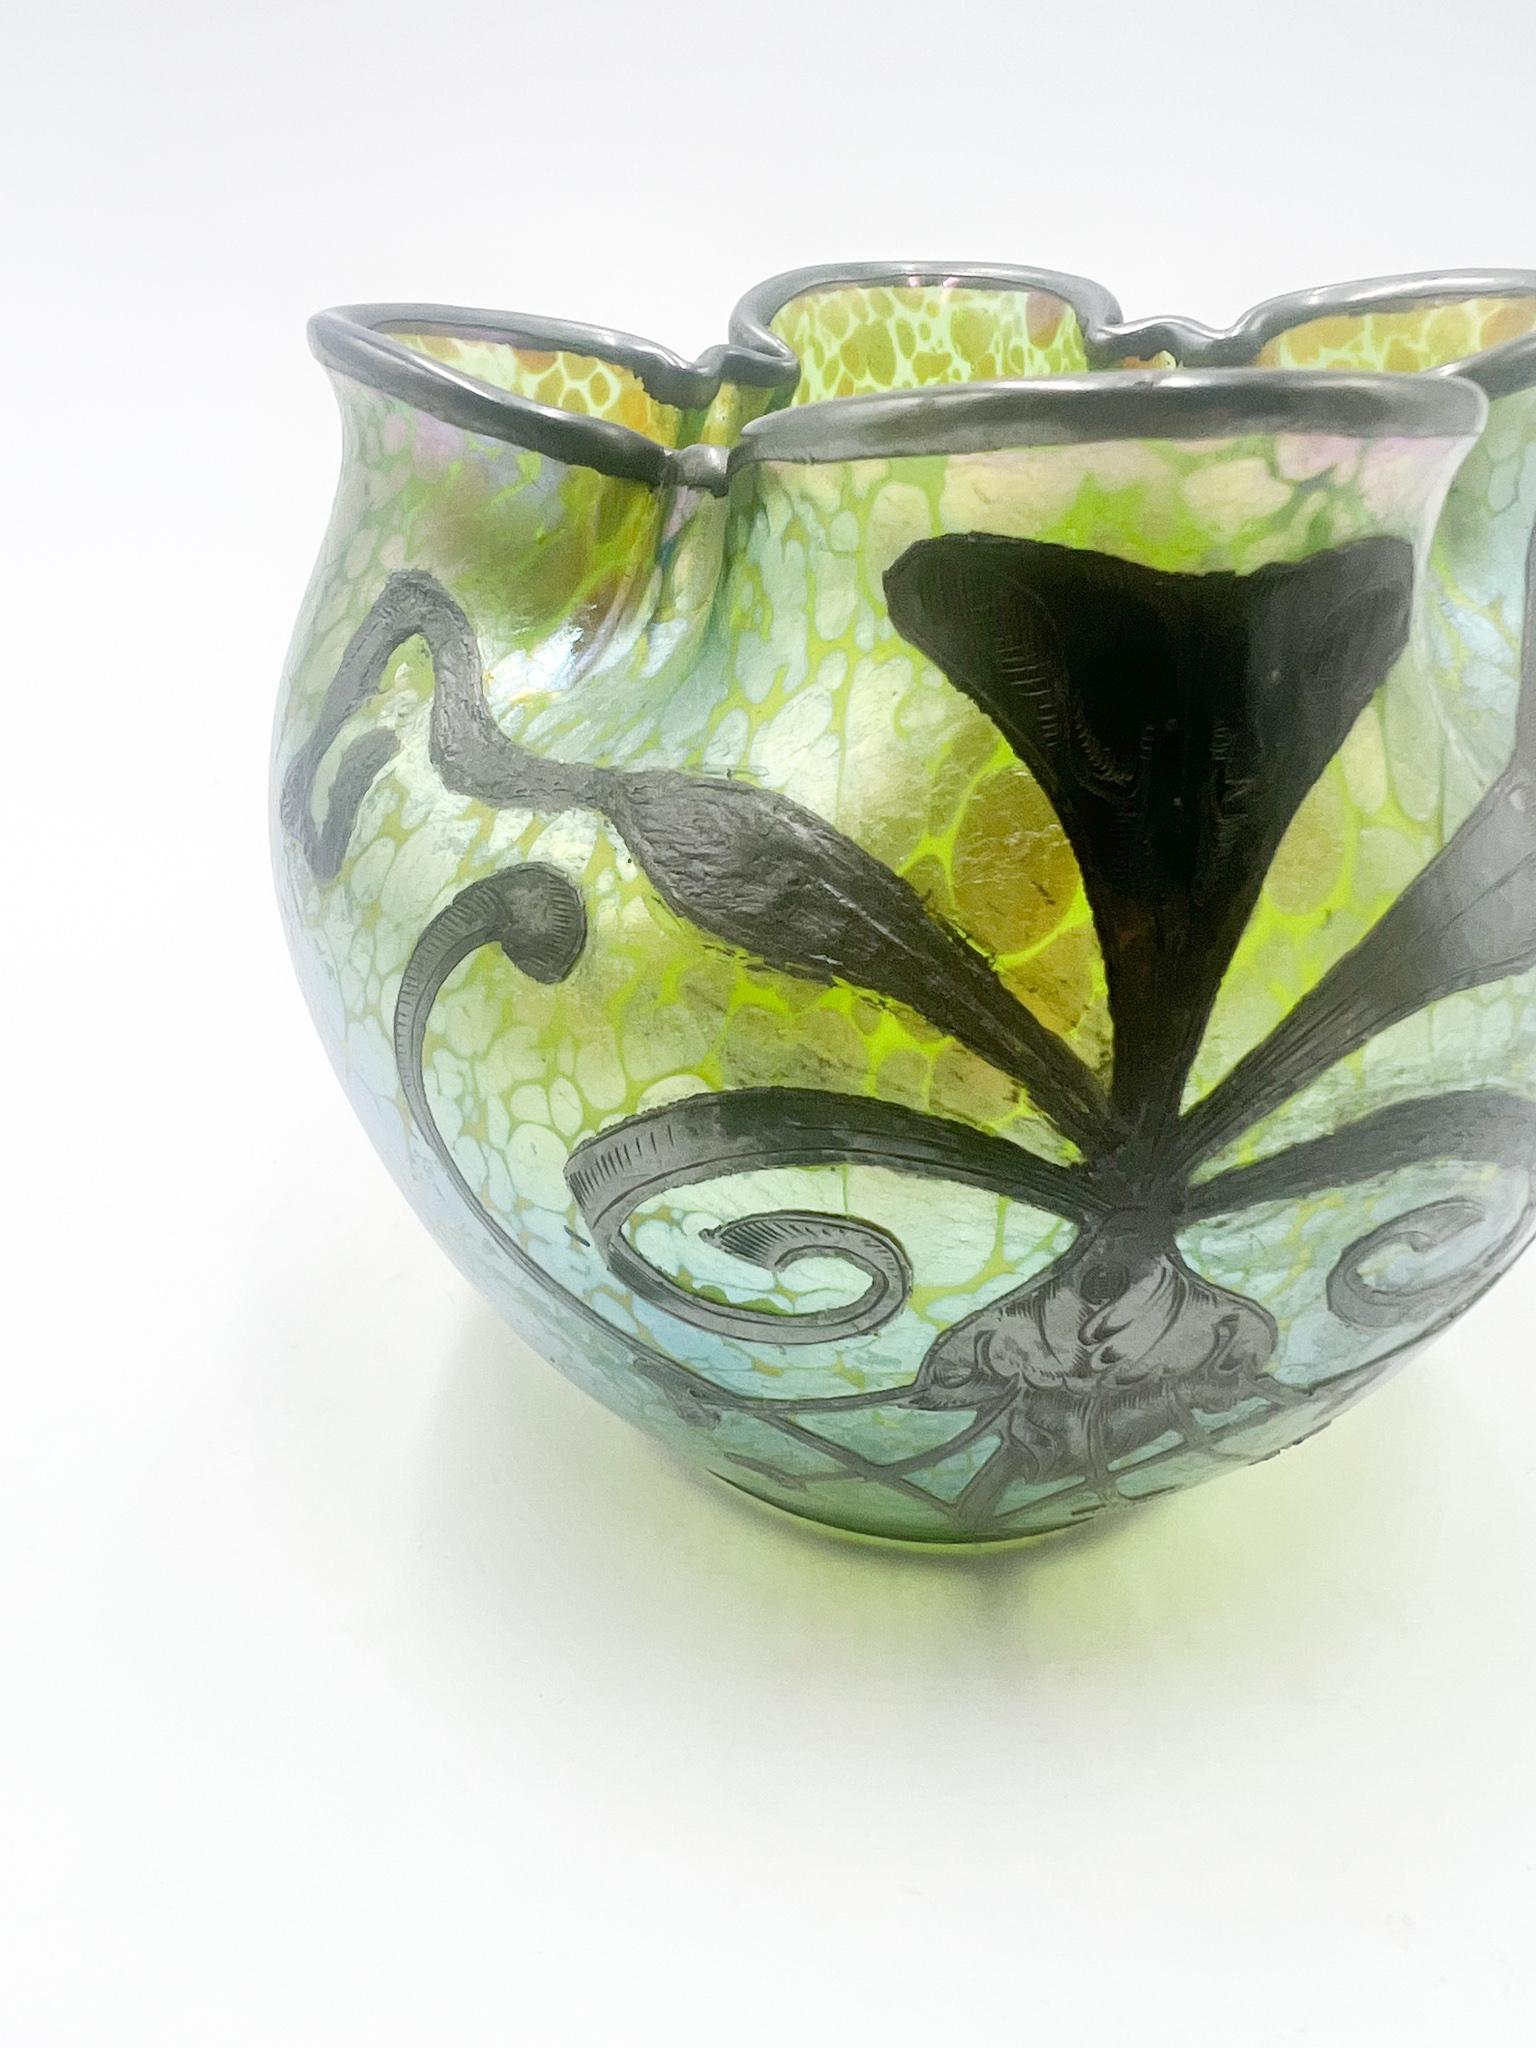 Early 20th Century Vase in Liberty Green Iridescent Glass and Silver Metal by Loetz, 1910